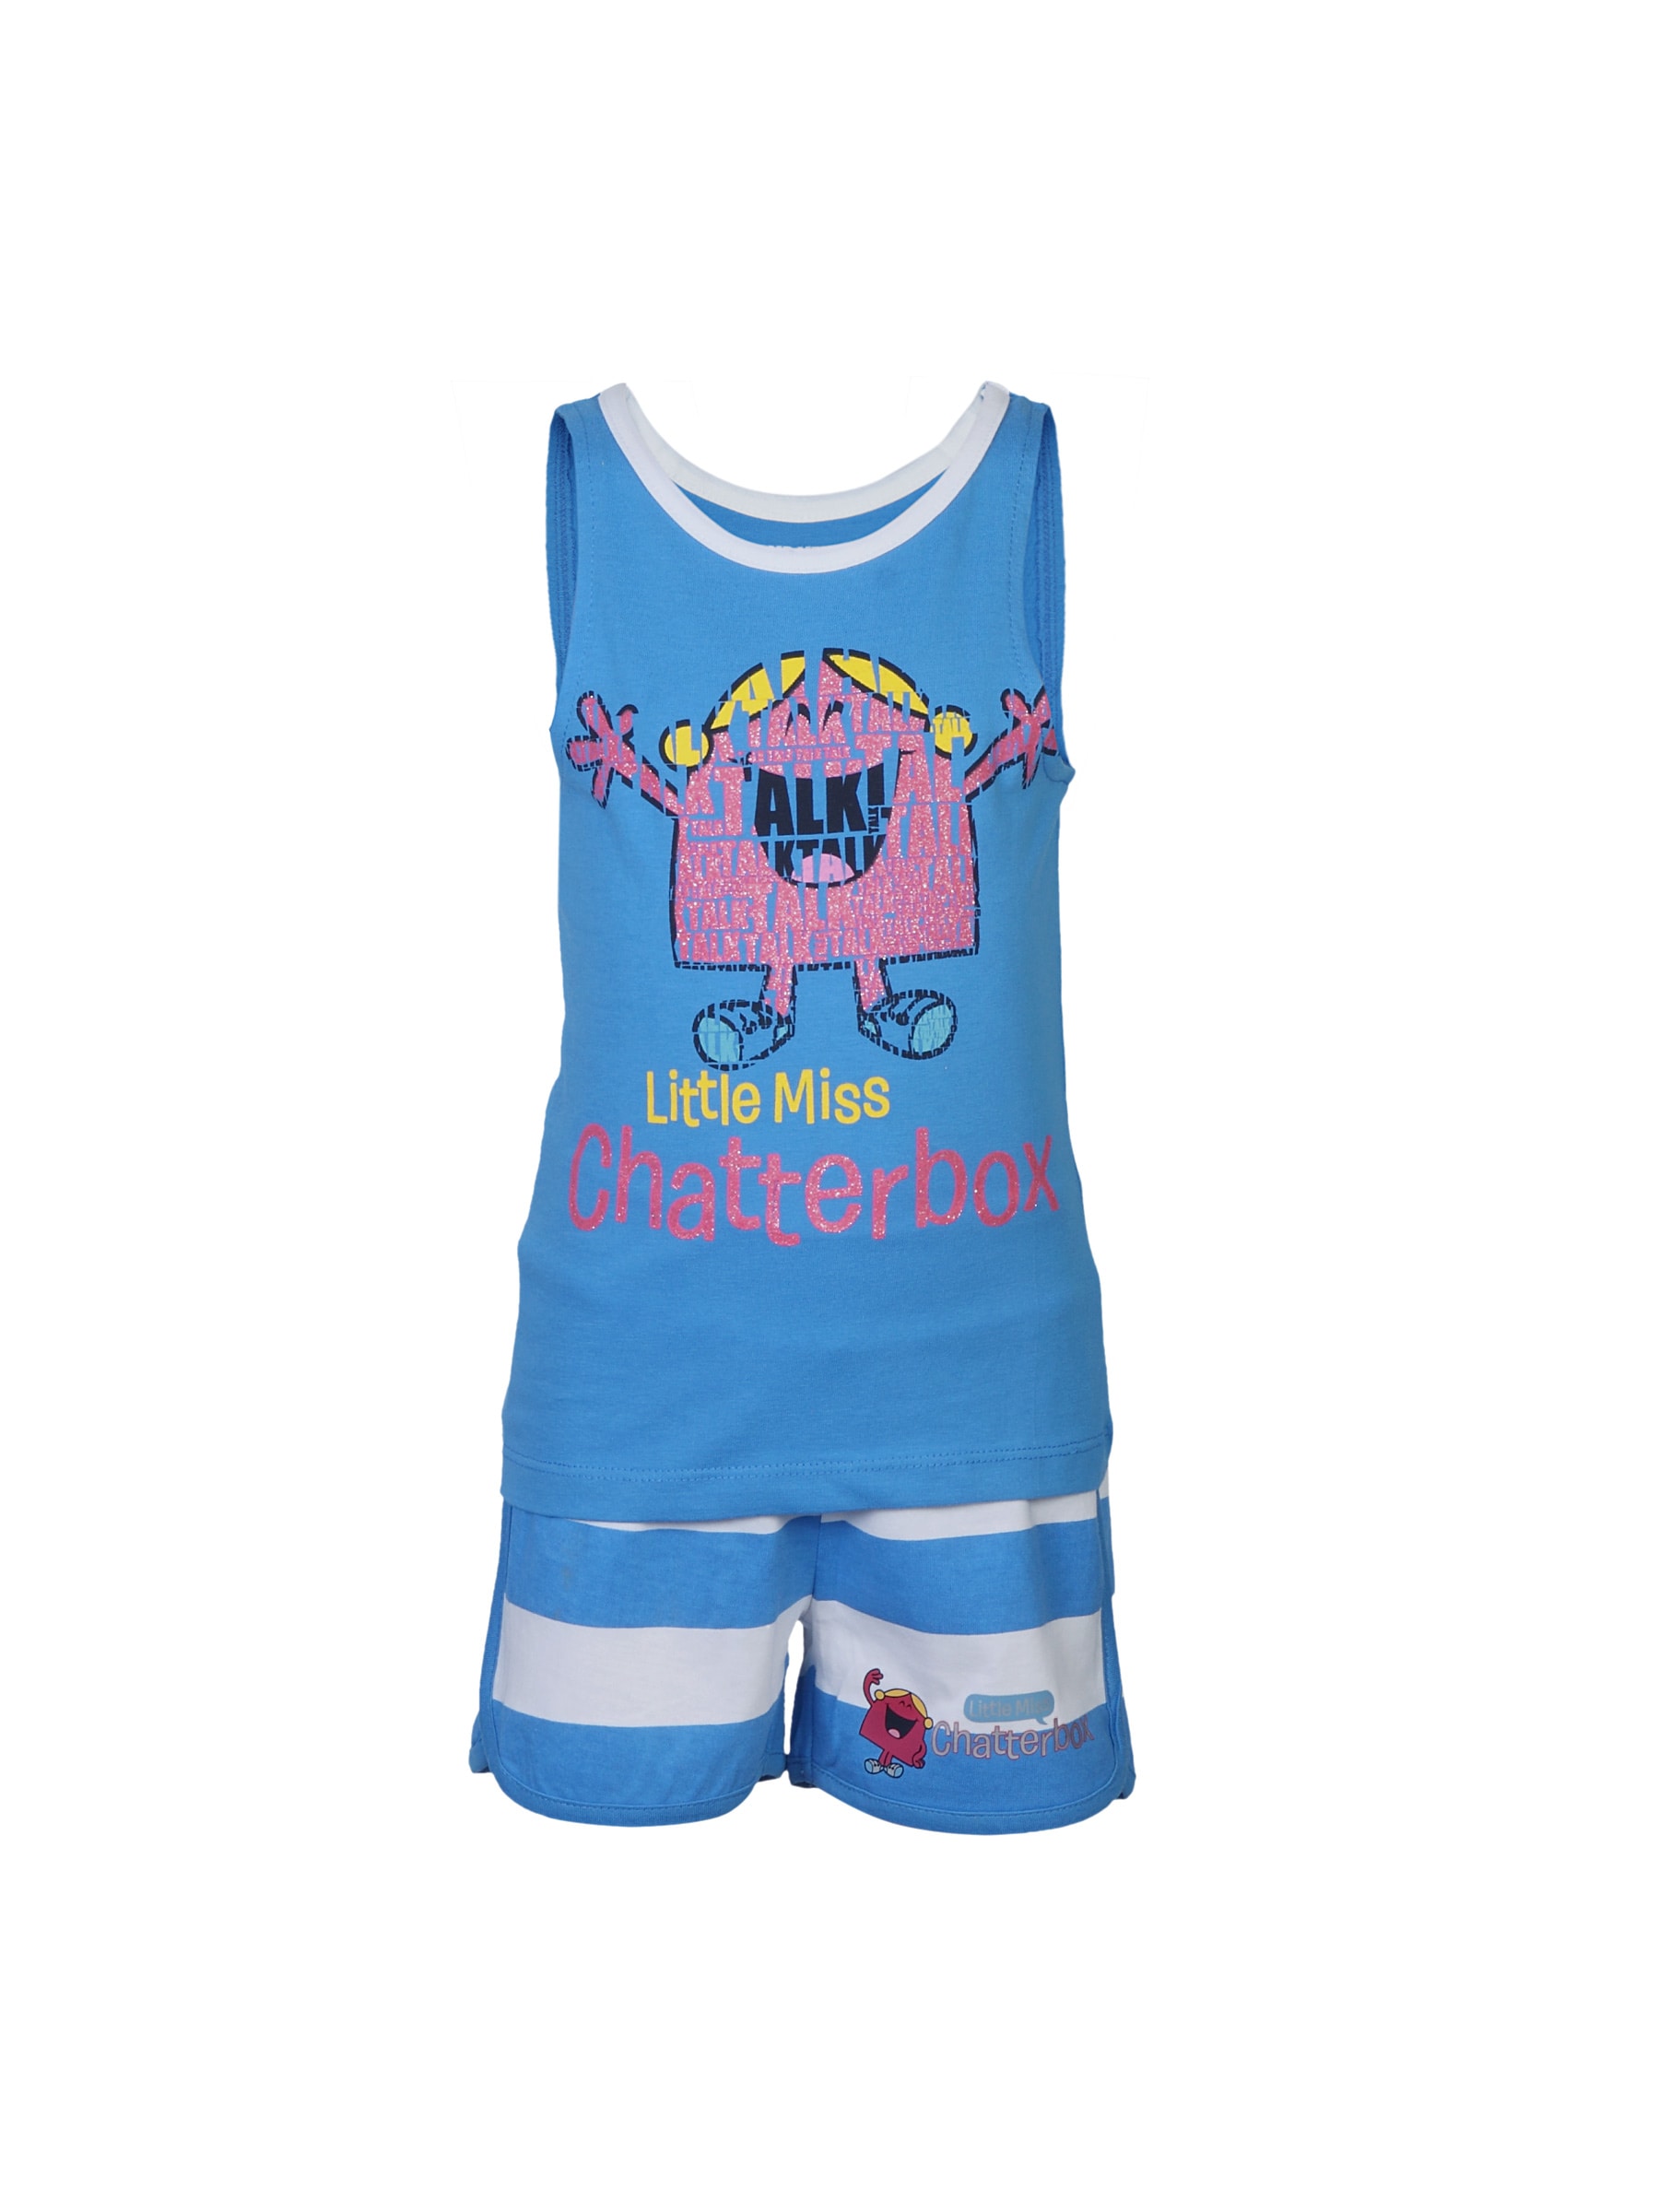 Little Miss Girls Chatterbox Blue Clothing Set